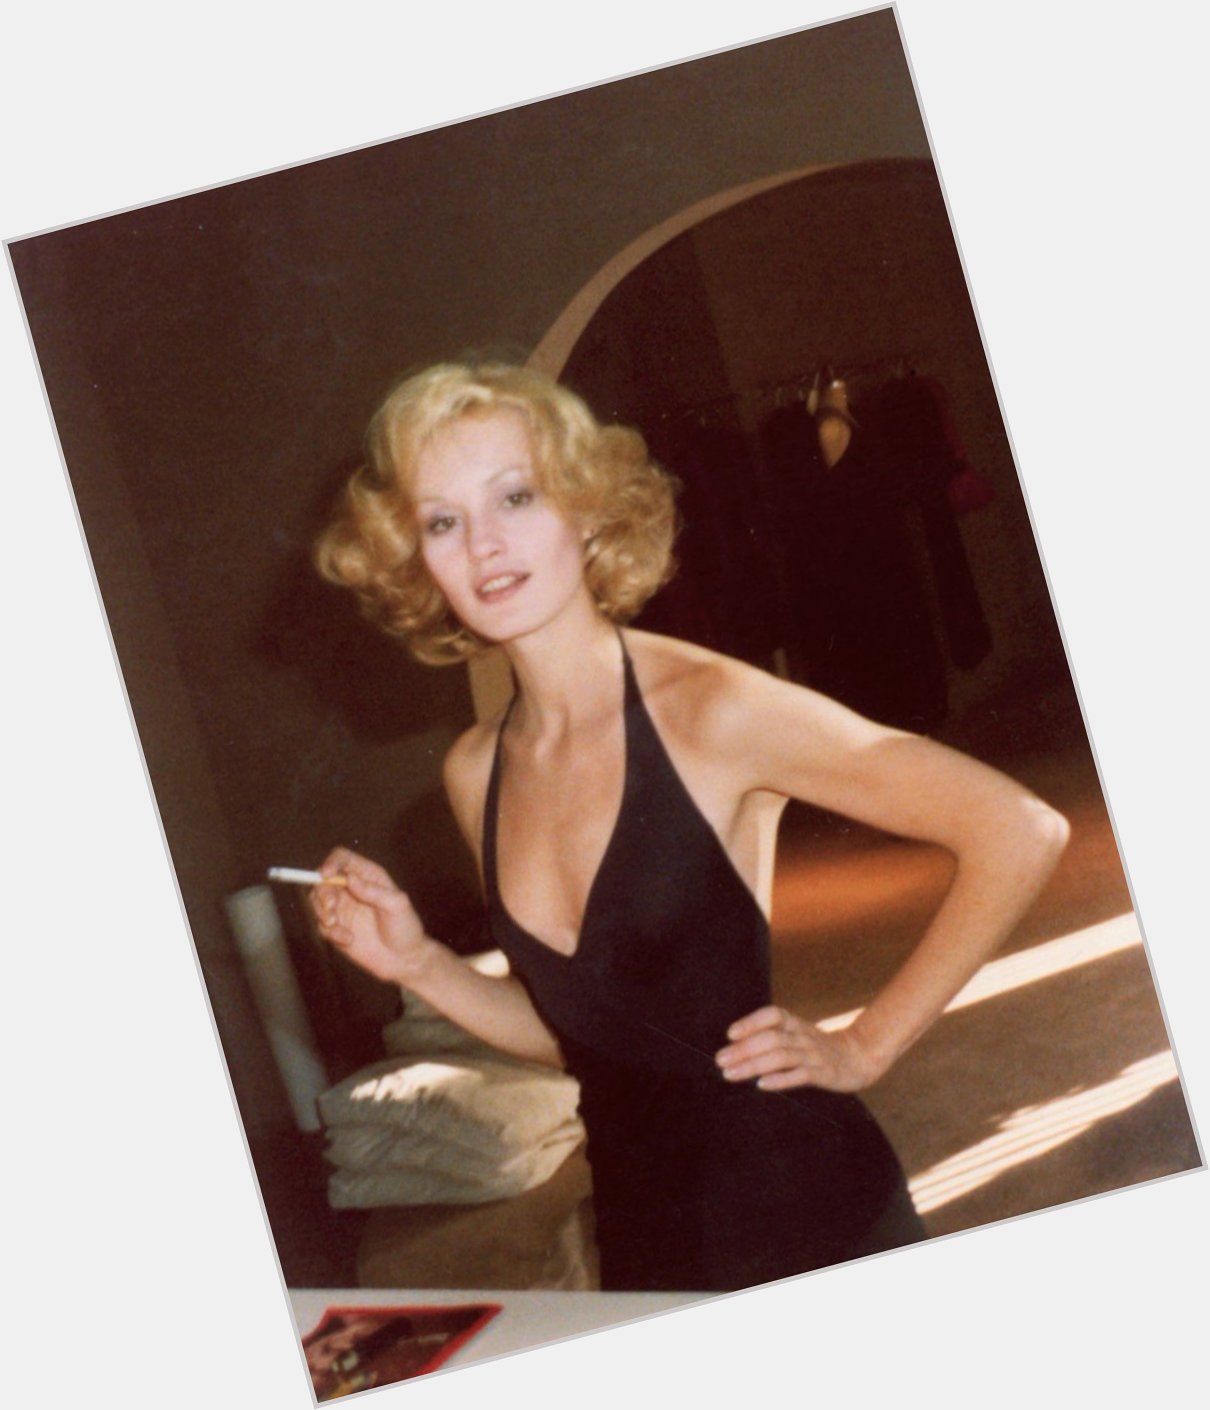 Happy birthday to this queen! 
jessica lange, i adore you 